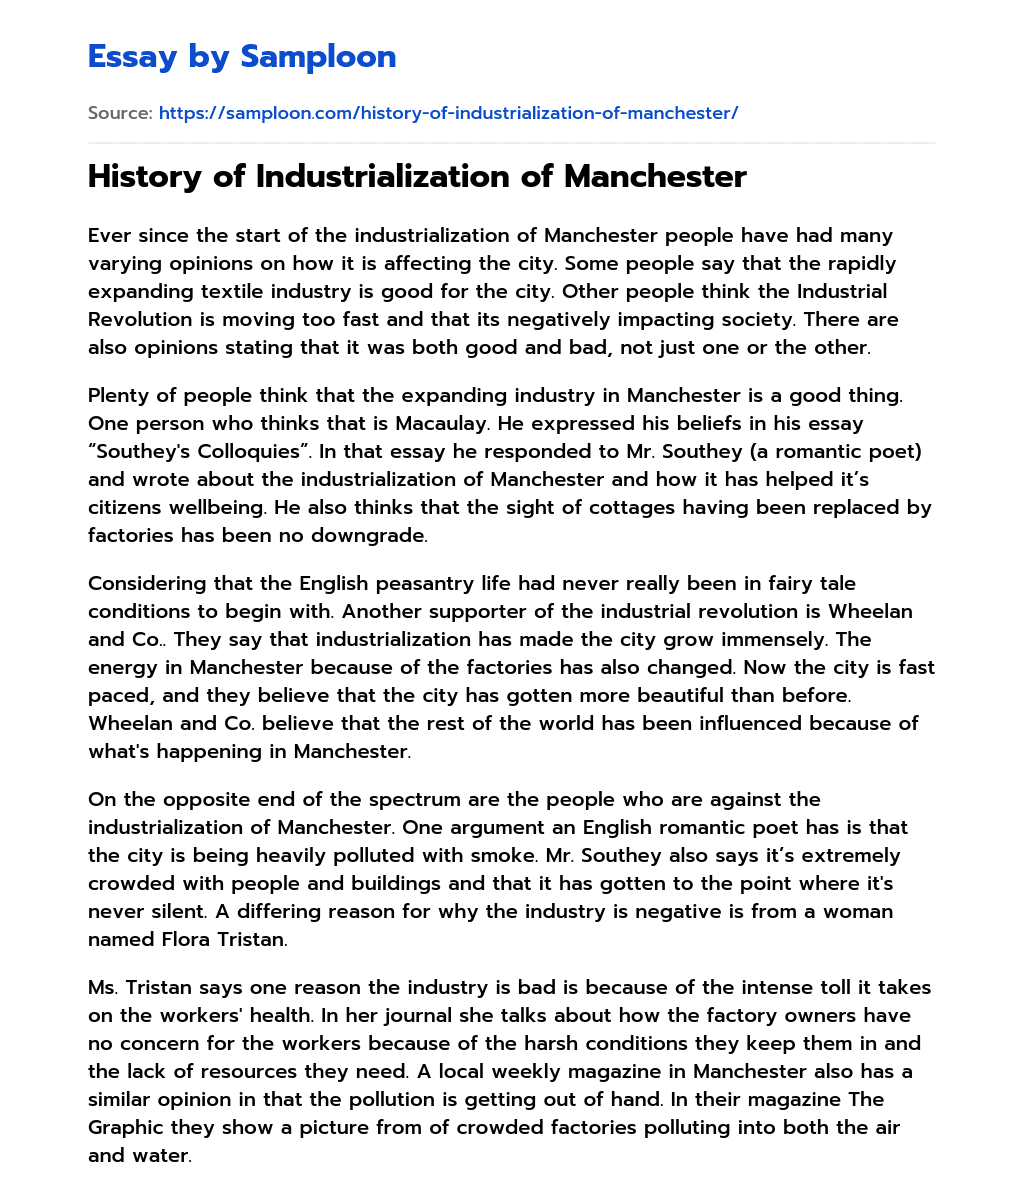 History of Industrialization of Manchester essay